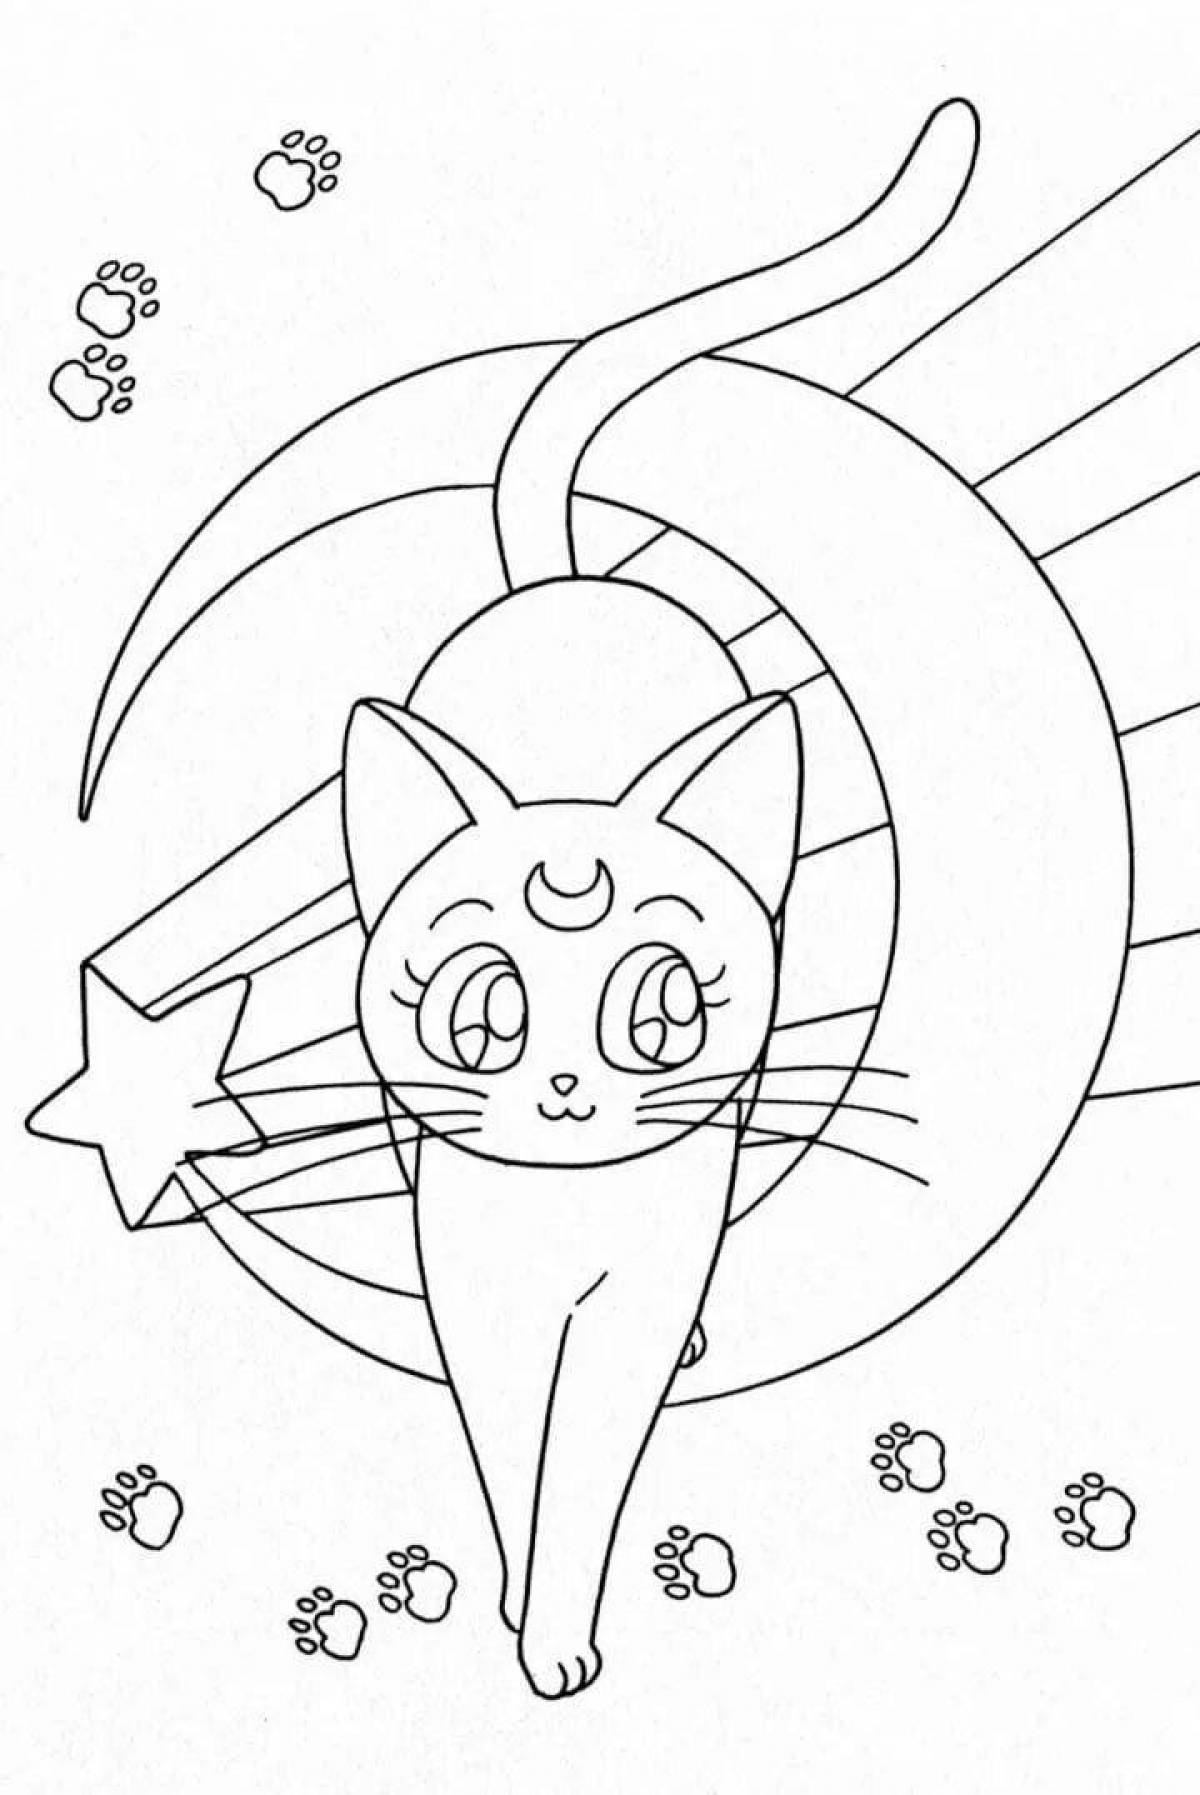 Adorable anime cat coloring book